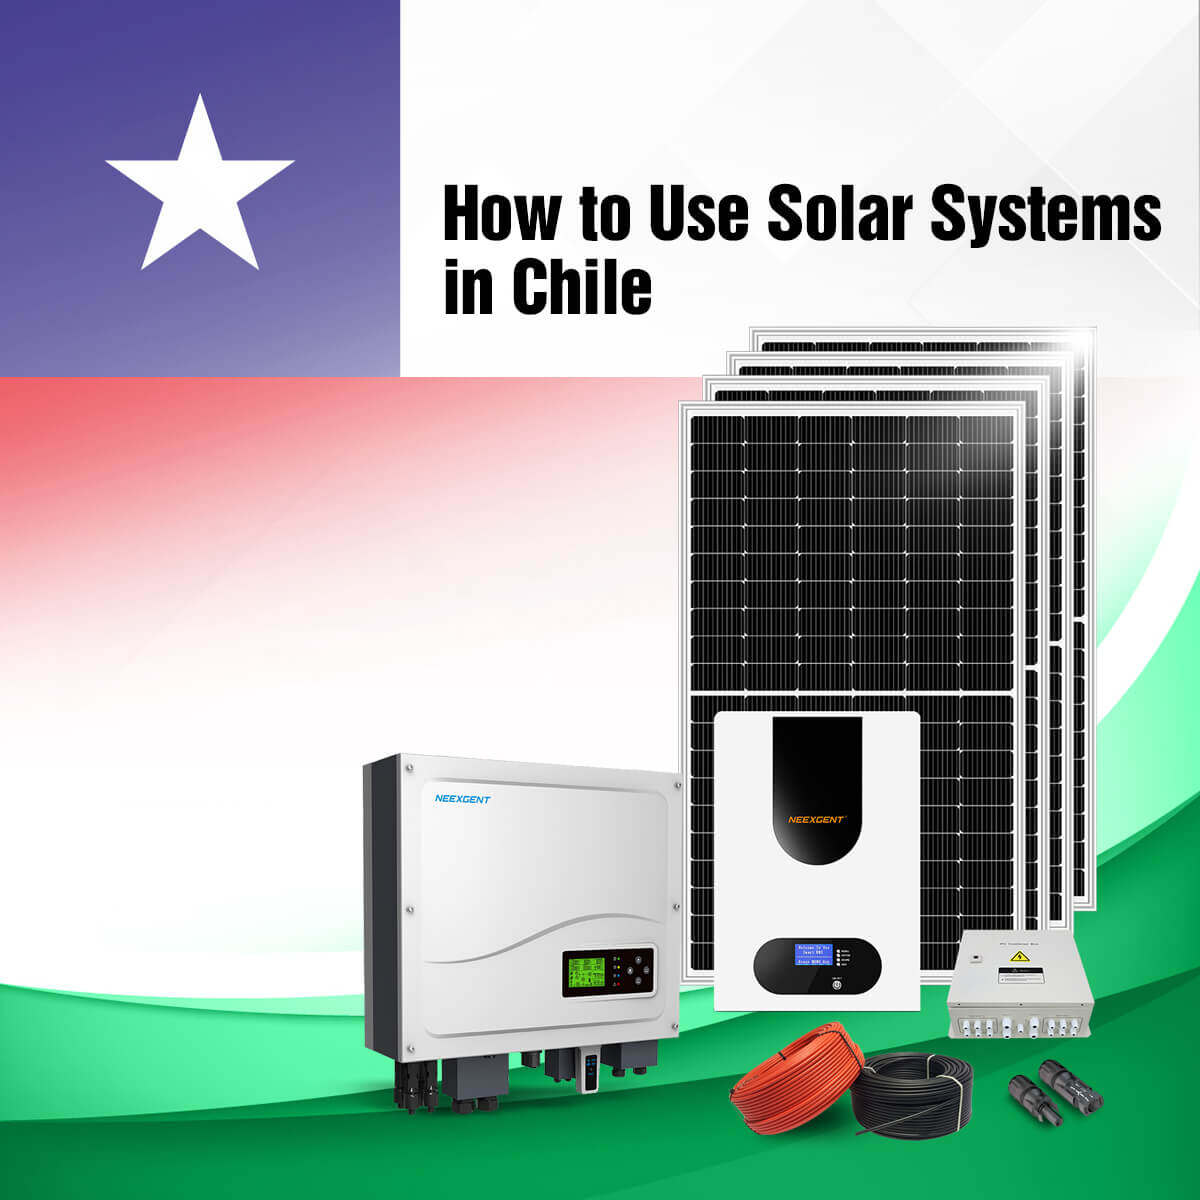 How to Use Solar Systems in Chile